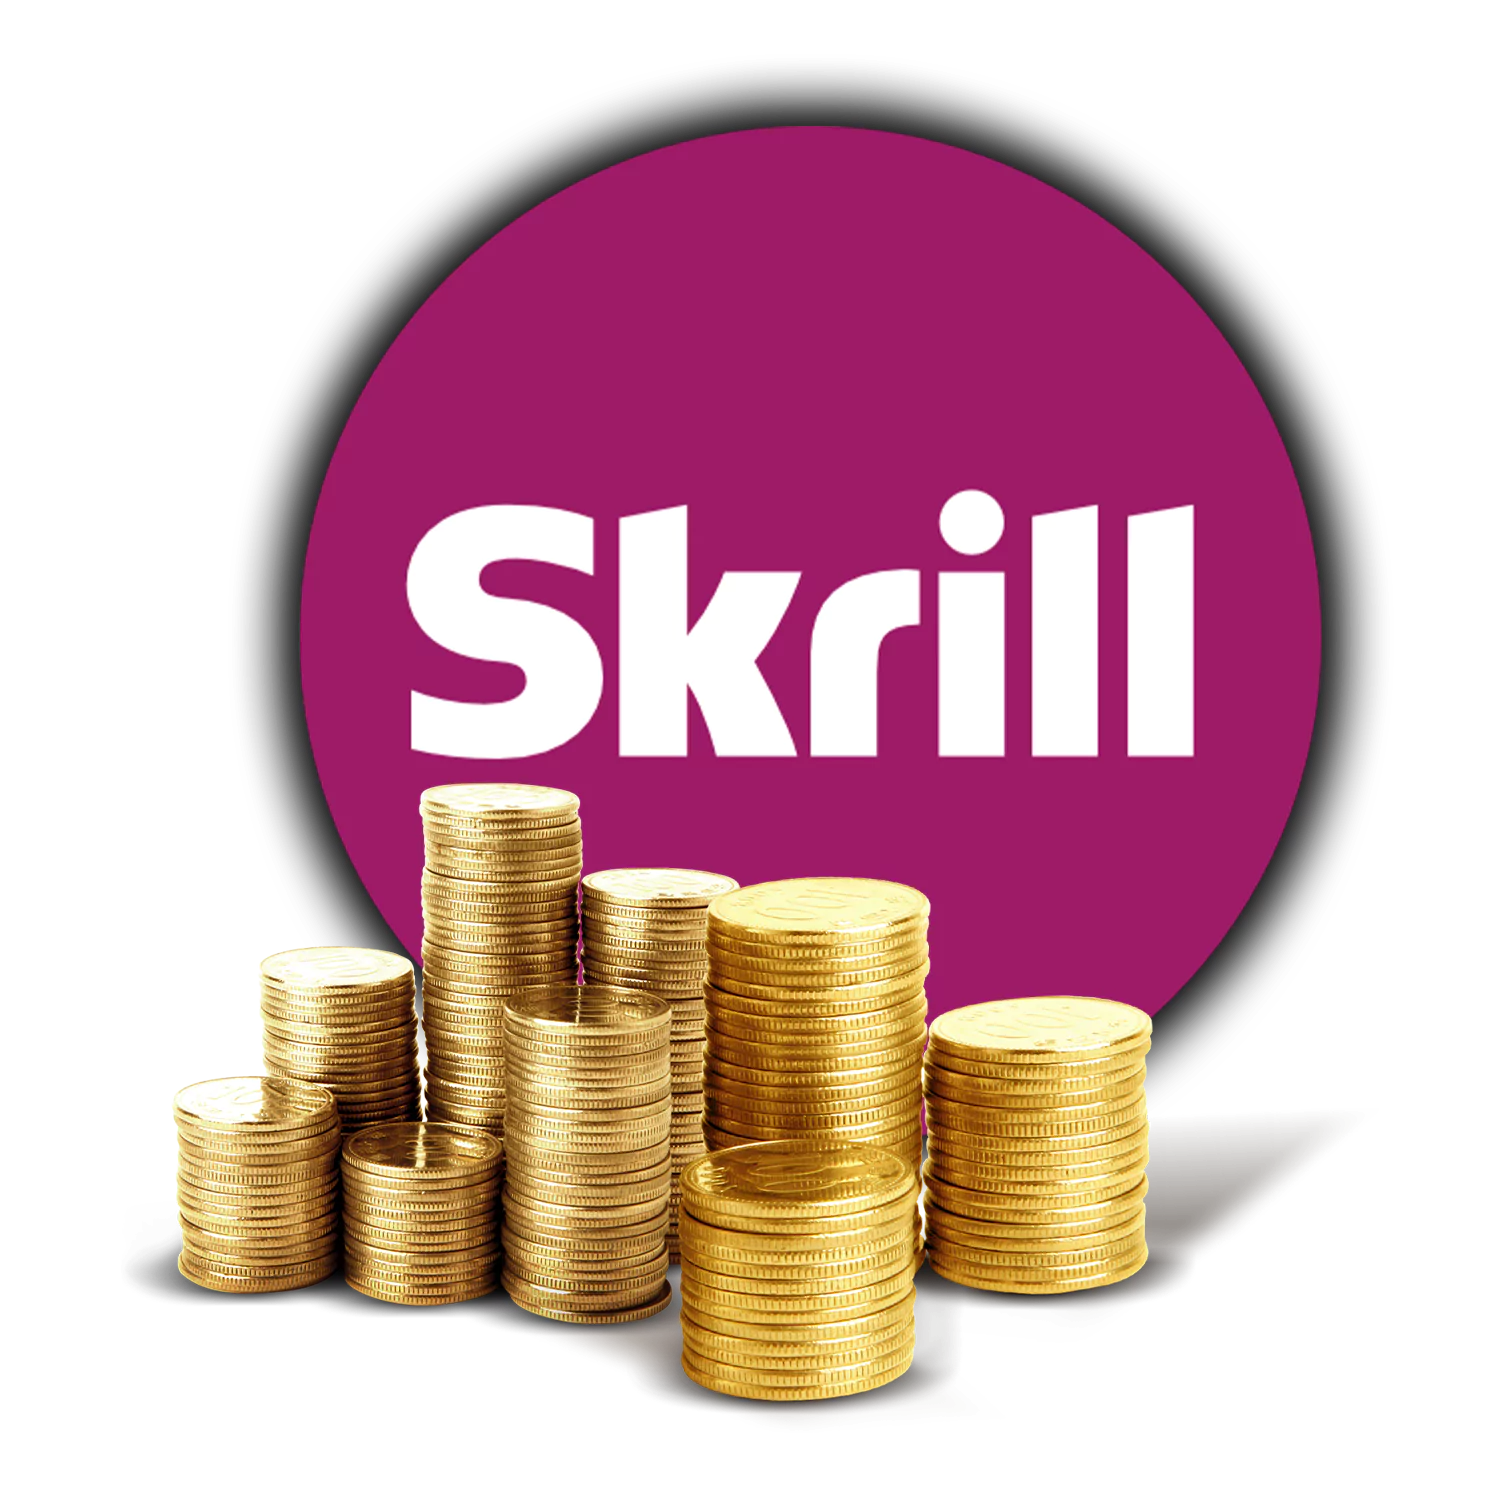 In our review, we explain how to use a Skrill account for betting.